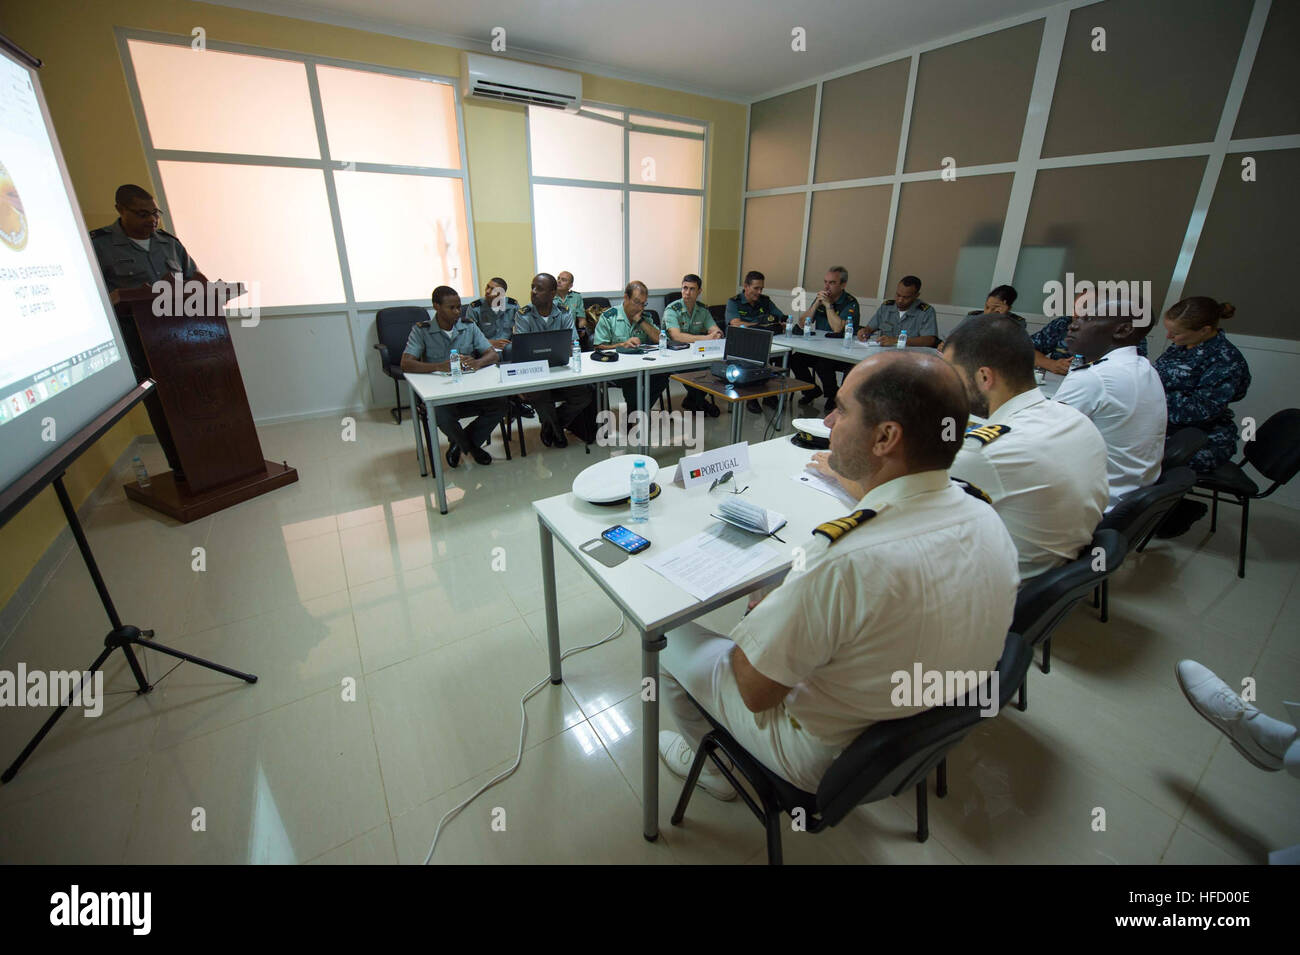 150427-N-TC720-026 MINDELO, Cabo Verde (April 27, 2015) Maritime forces from Spain, Cabo Verde, Senegal, Portugal and the United States conduct a closing brief in Mindelo, Cabo Verde, which concluded Exercise Saharan Express 2015, April 27. Saharan Express is a U.S. Africa Command-sponsored multinational maritime exercise designed to increase maritime safety and security in the waters of West Africa. (U.S. Navy photo by Mass Communication Specialist 3rd Class Mat Murch/Released) Saharan Express 150427-N-TC720-026 Stock Photo